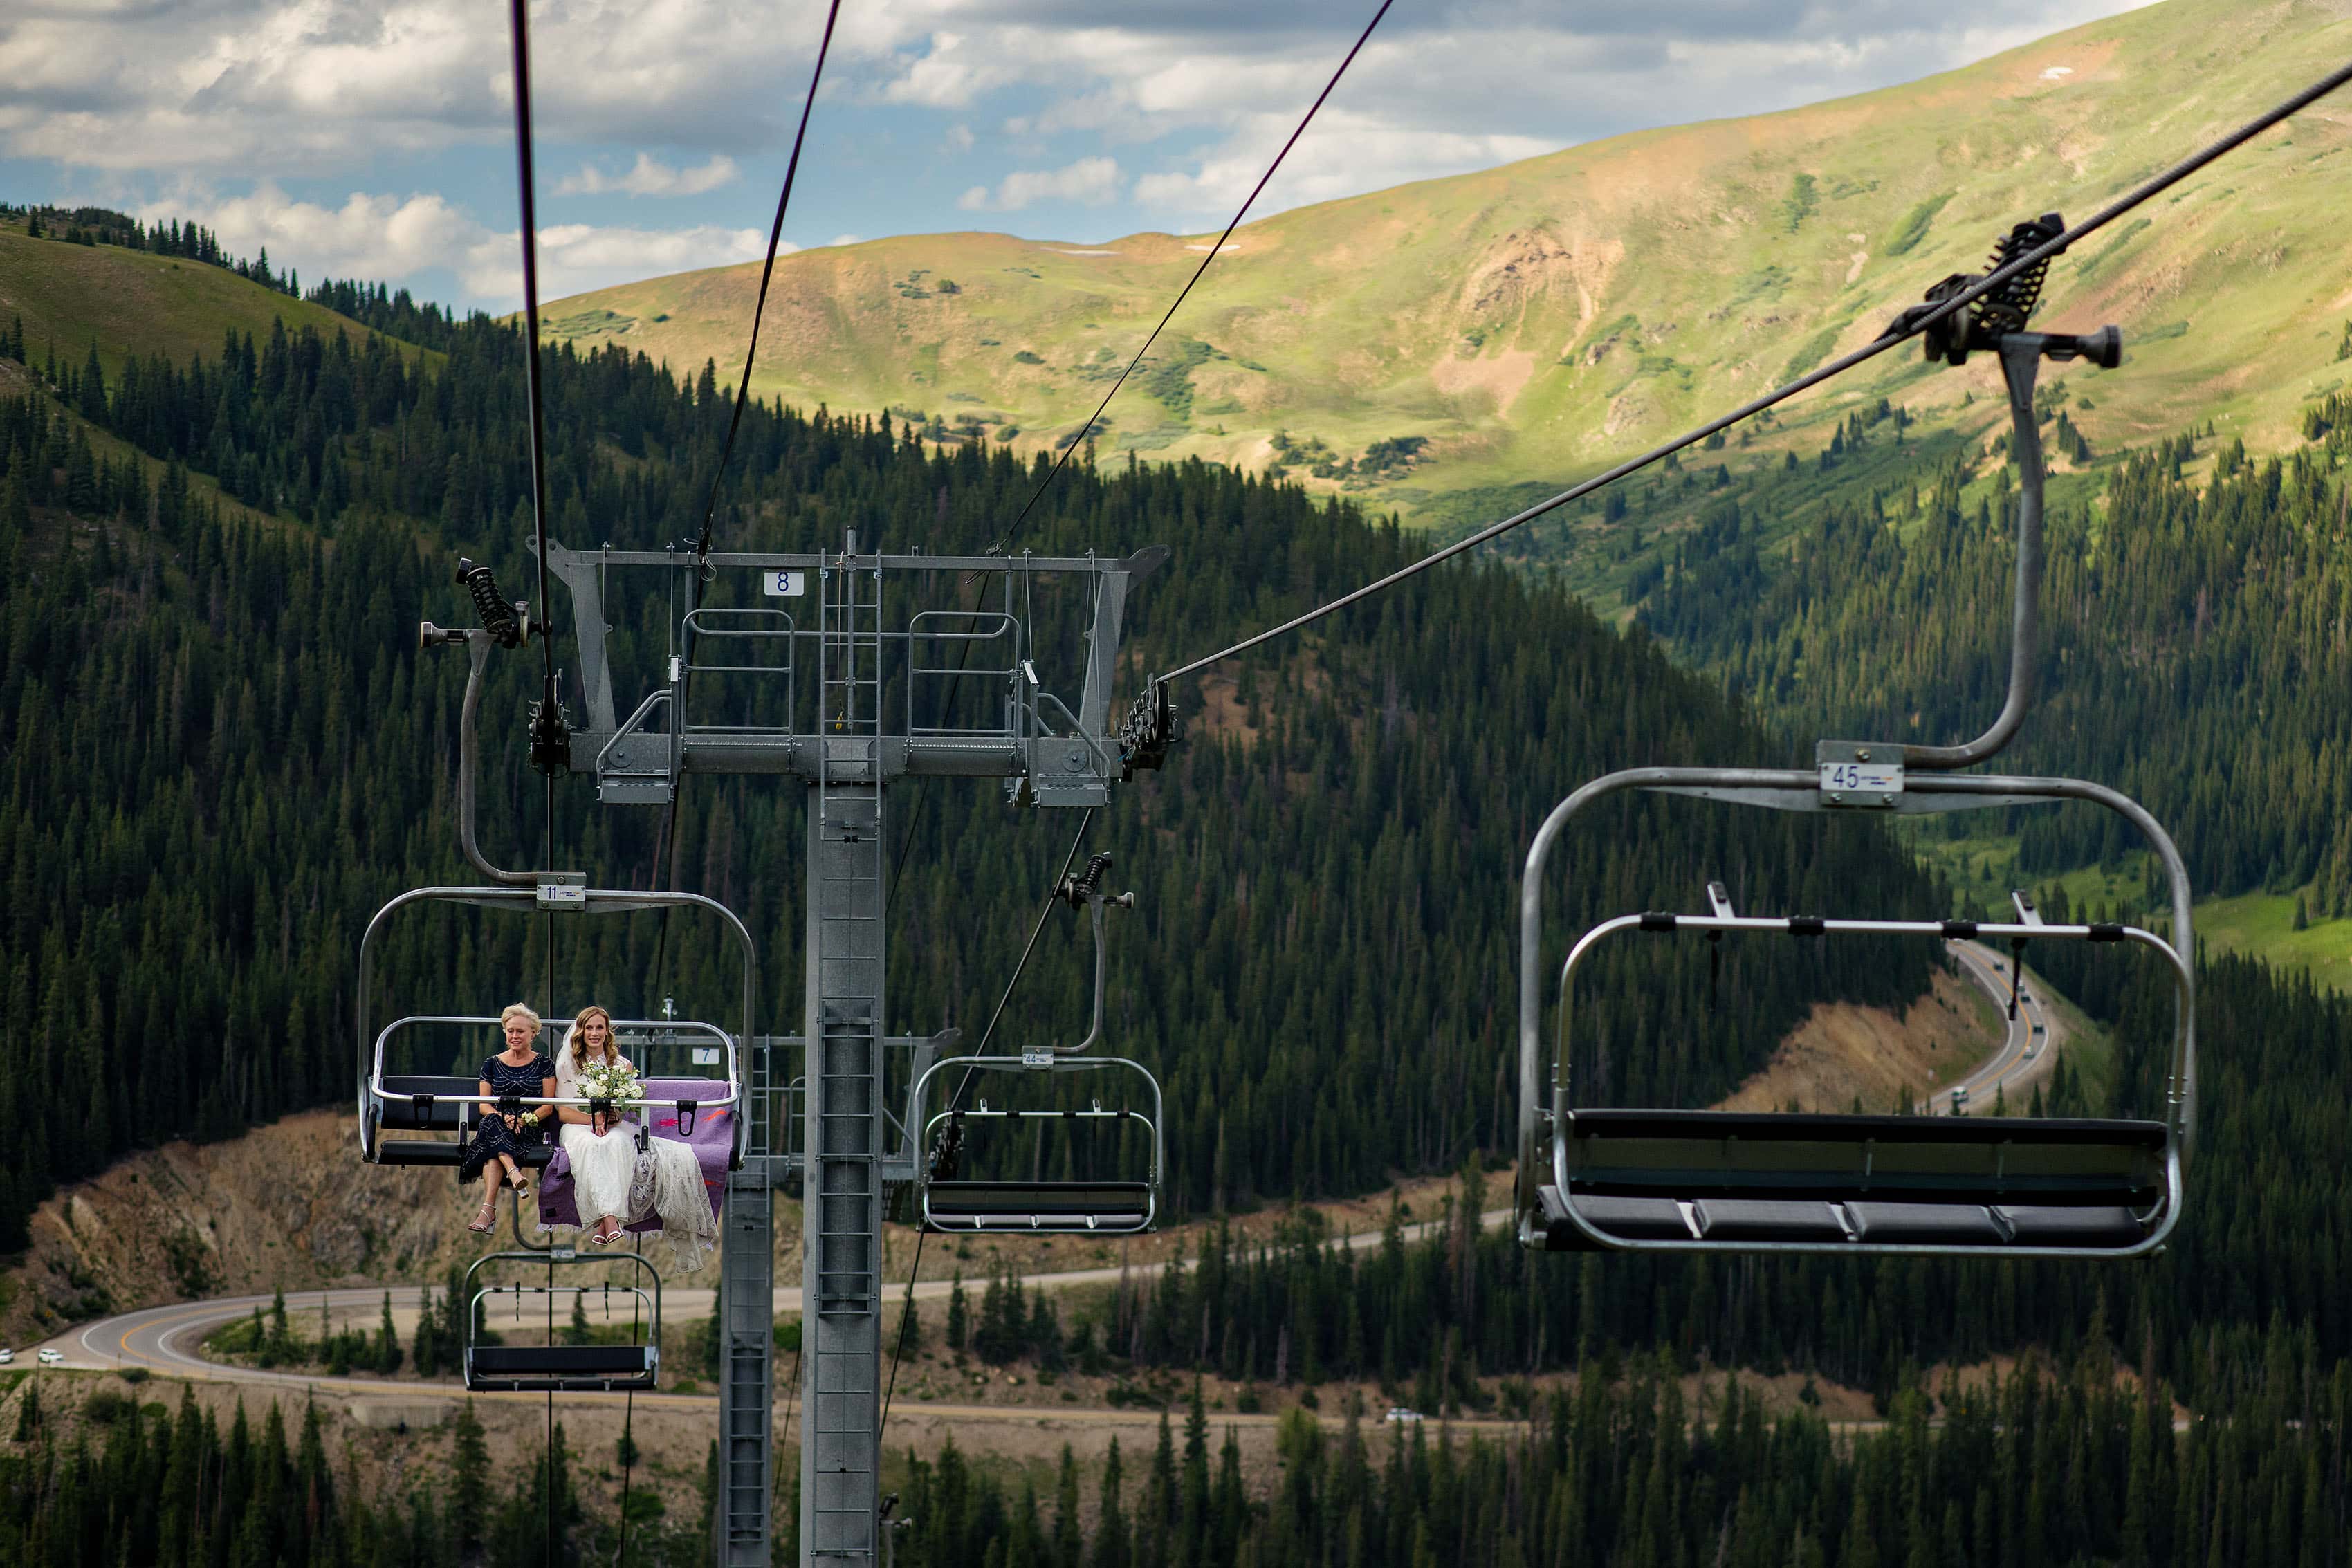 The bride rides the Black Mountain Express chairlift with her mother to the ceremony